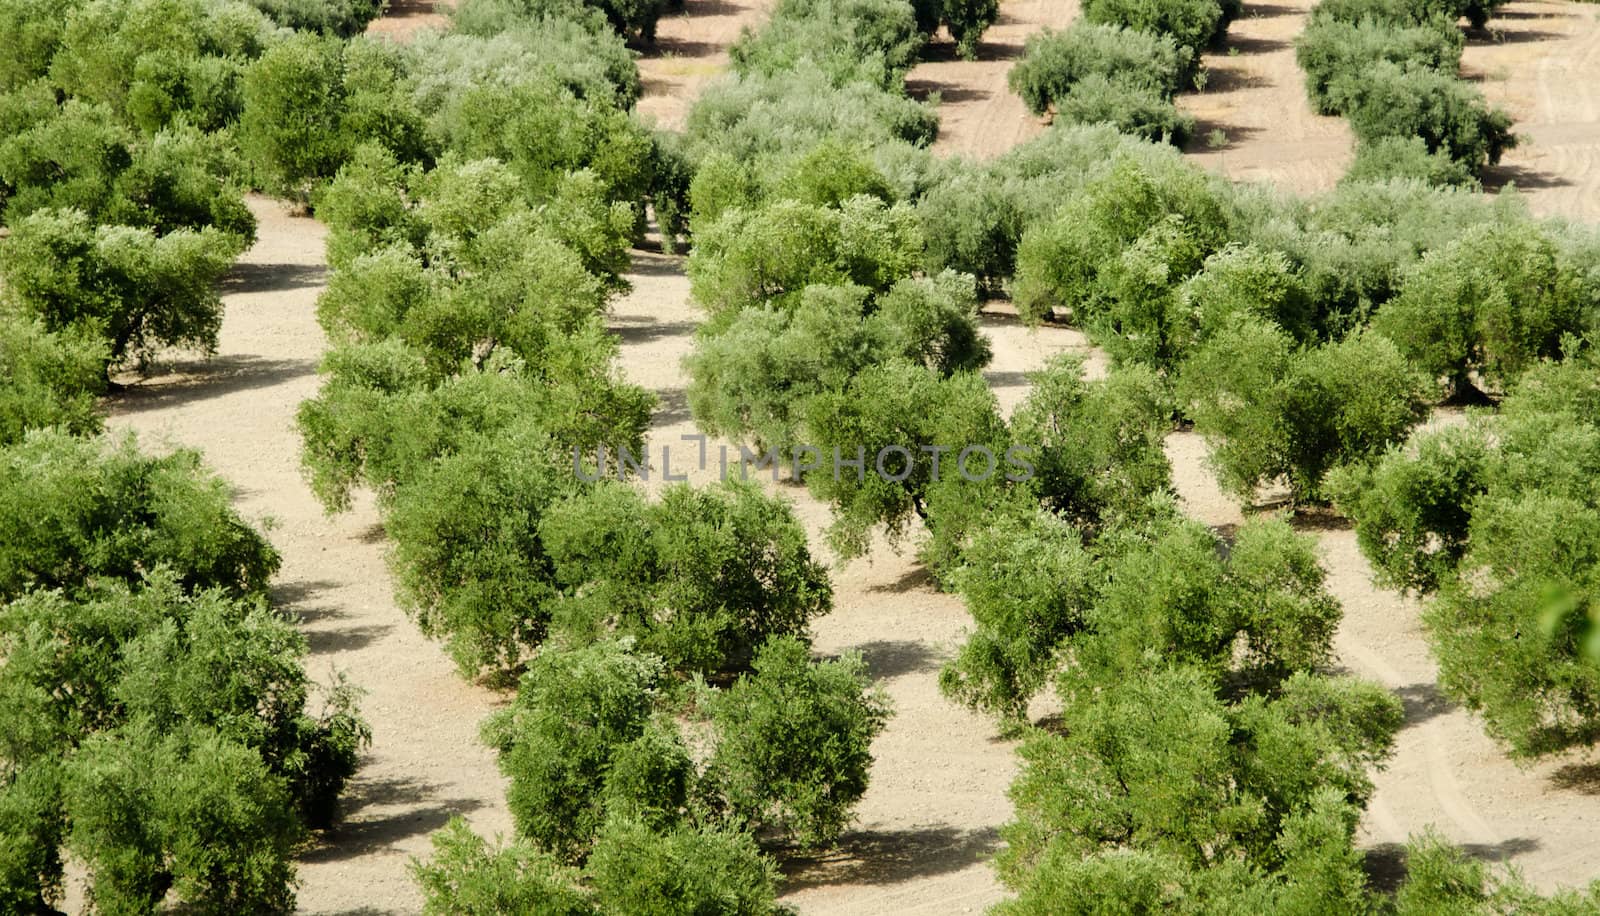 the rows of olive trees by njaj